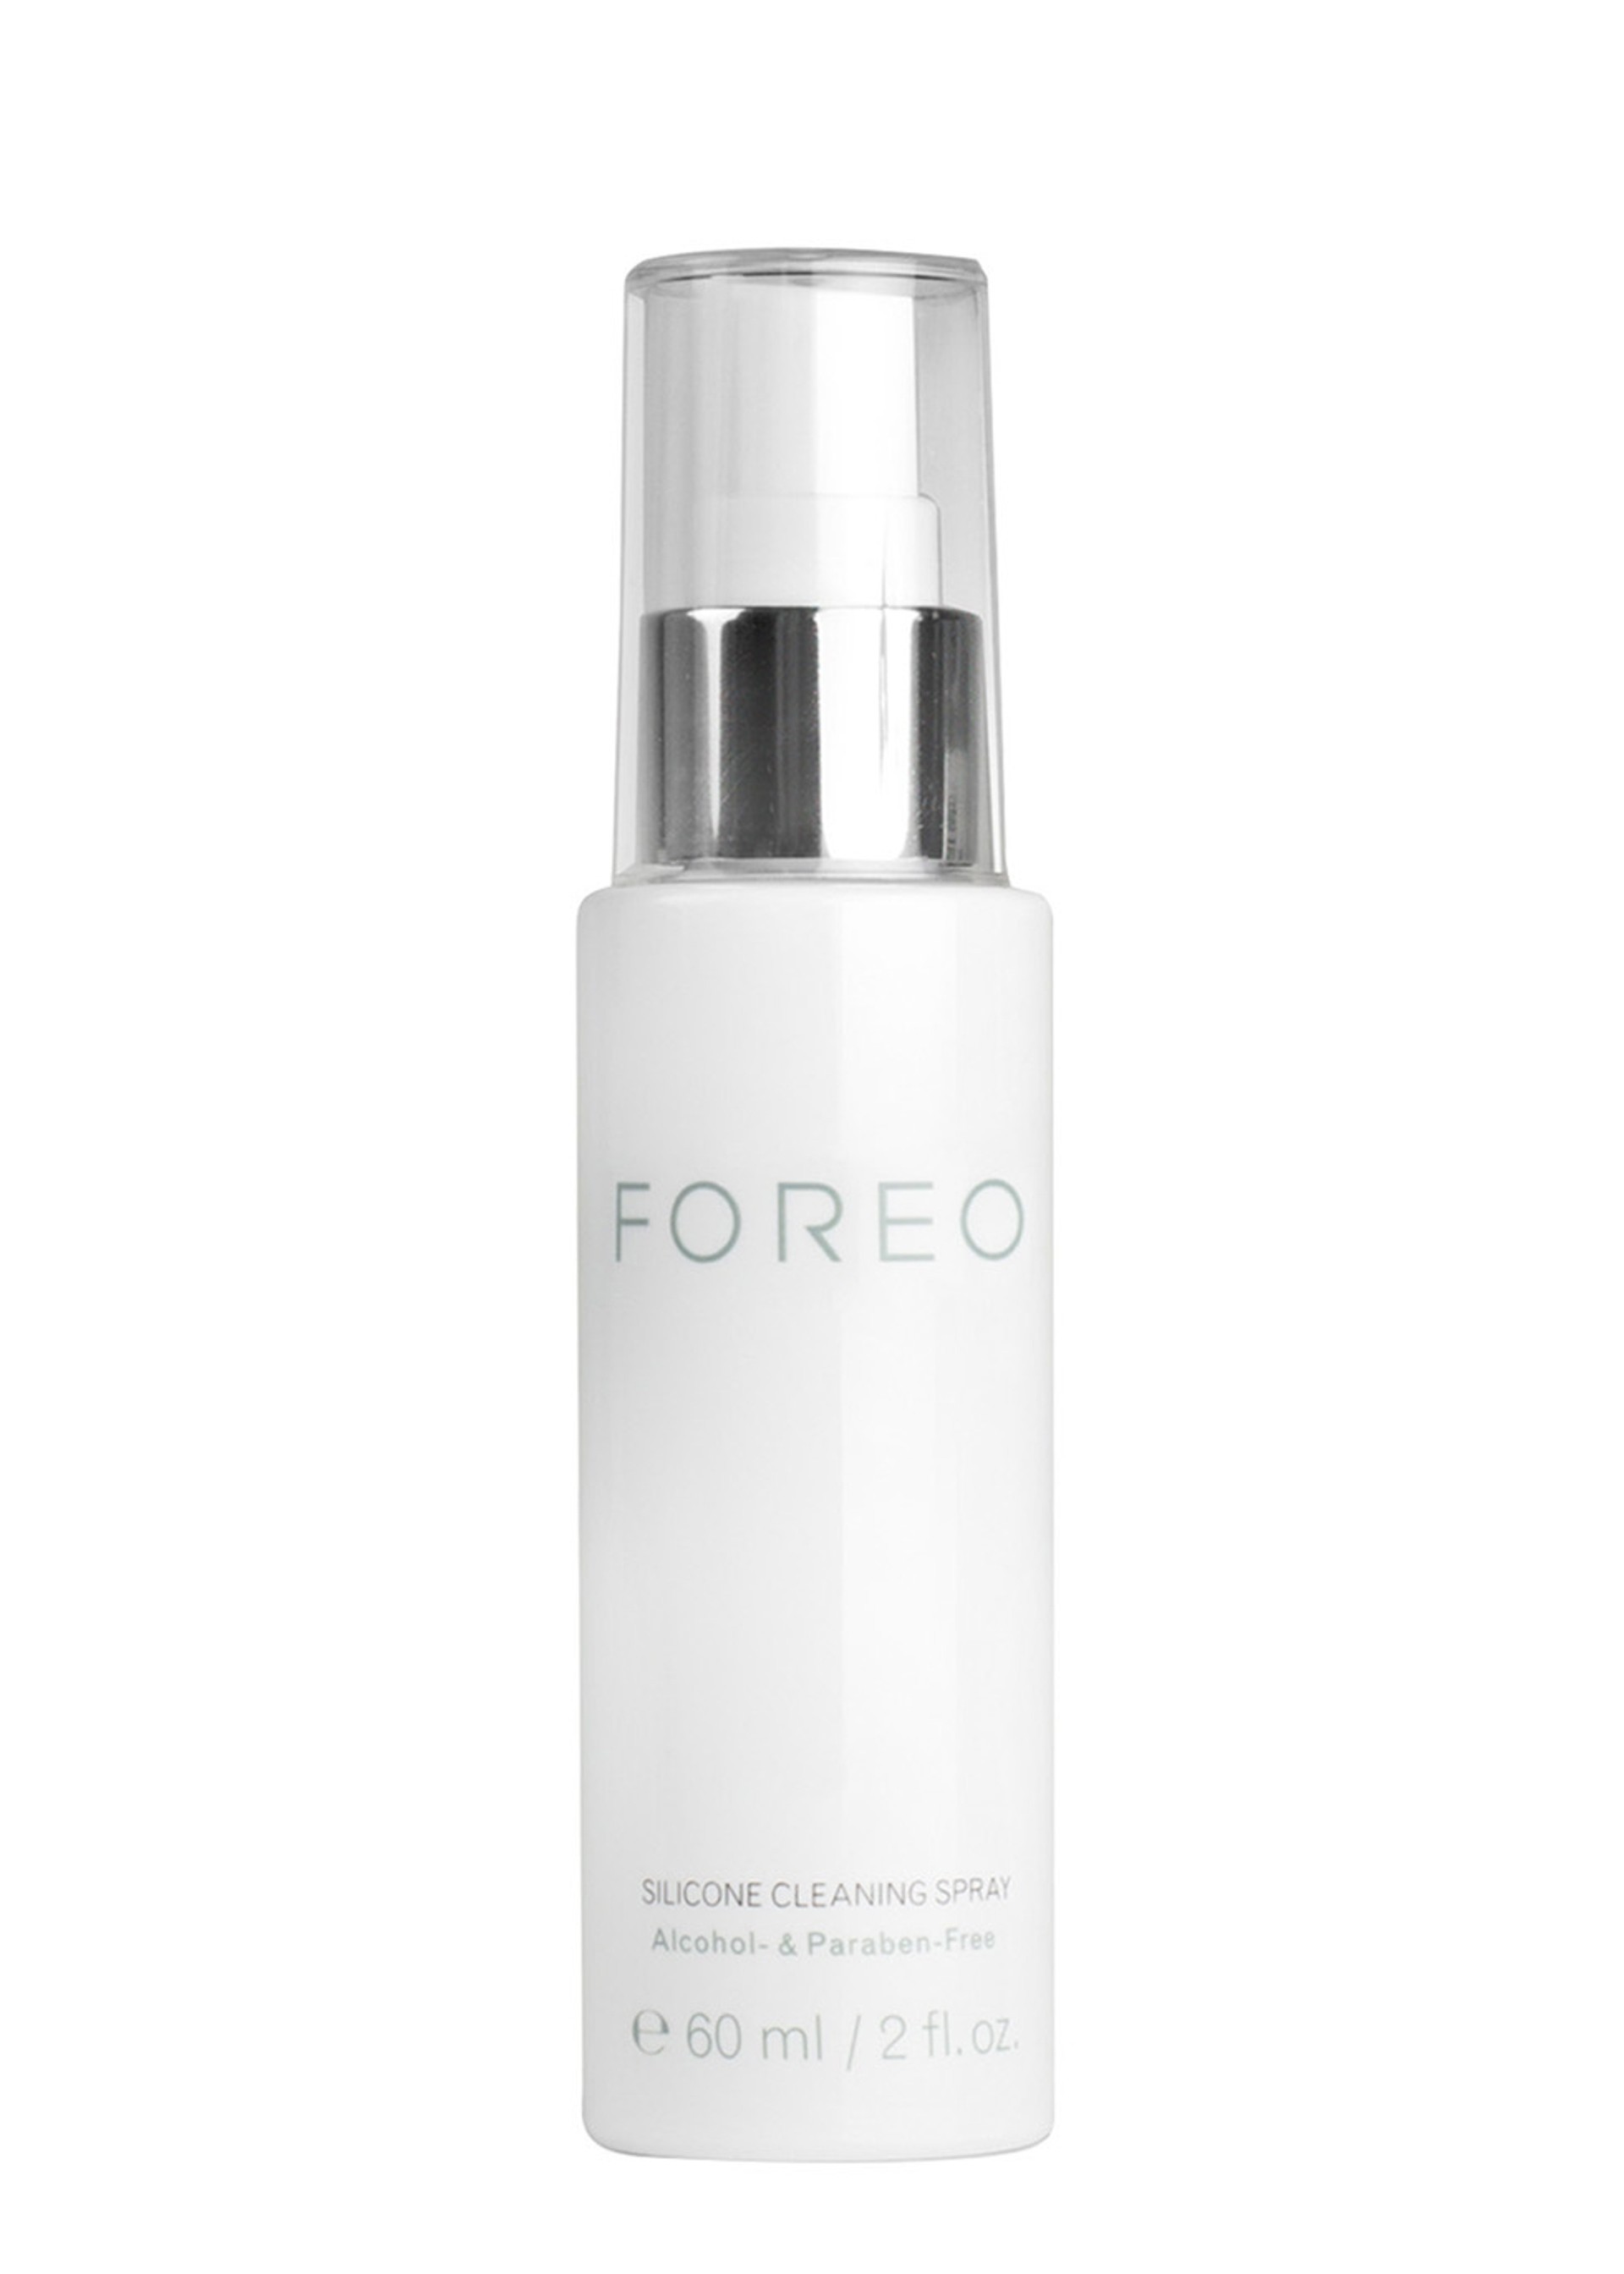 Foreo Silicone Cleaning Spray 60ml